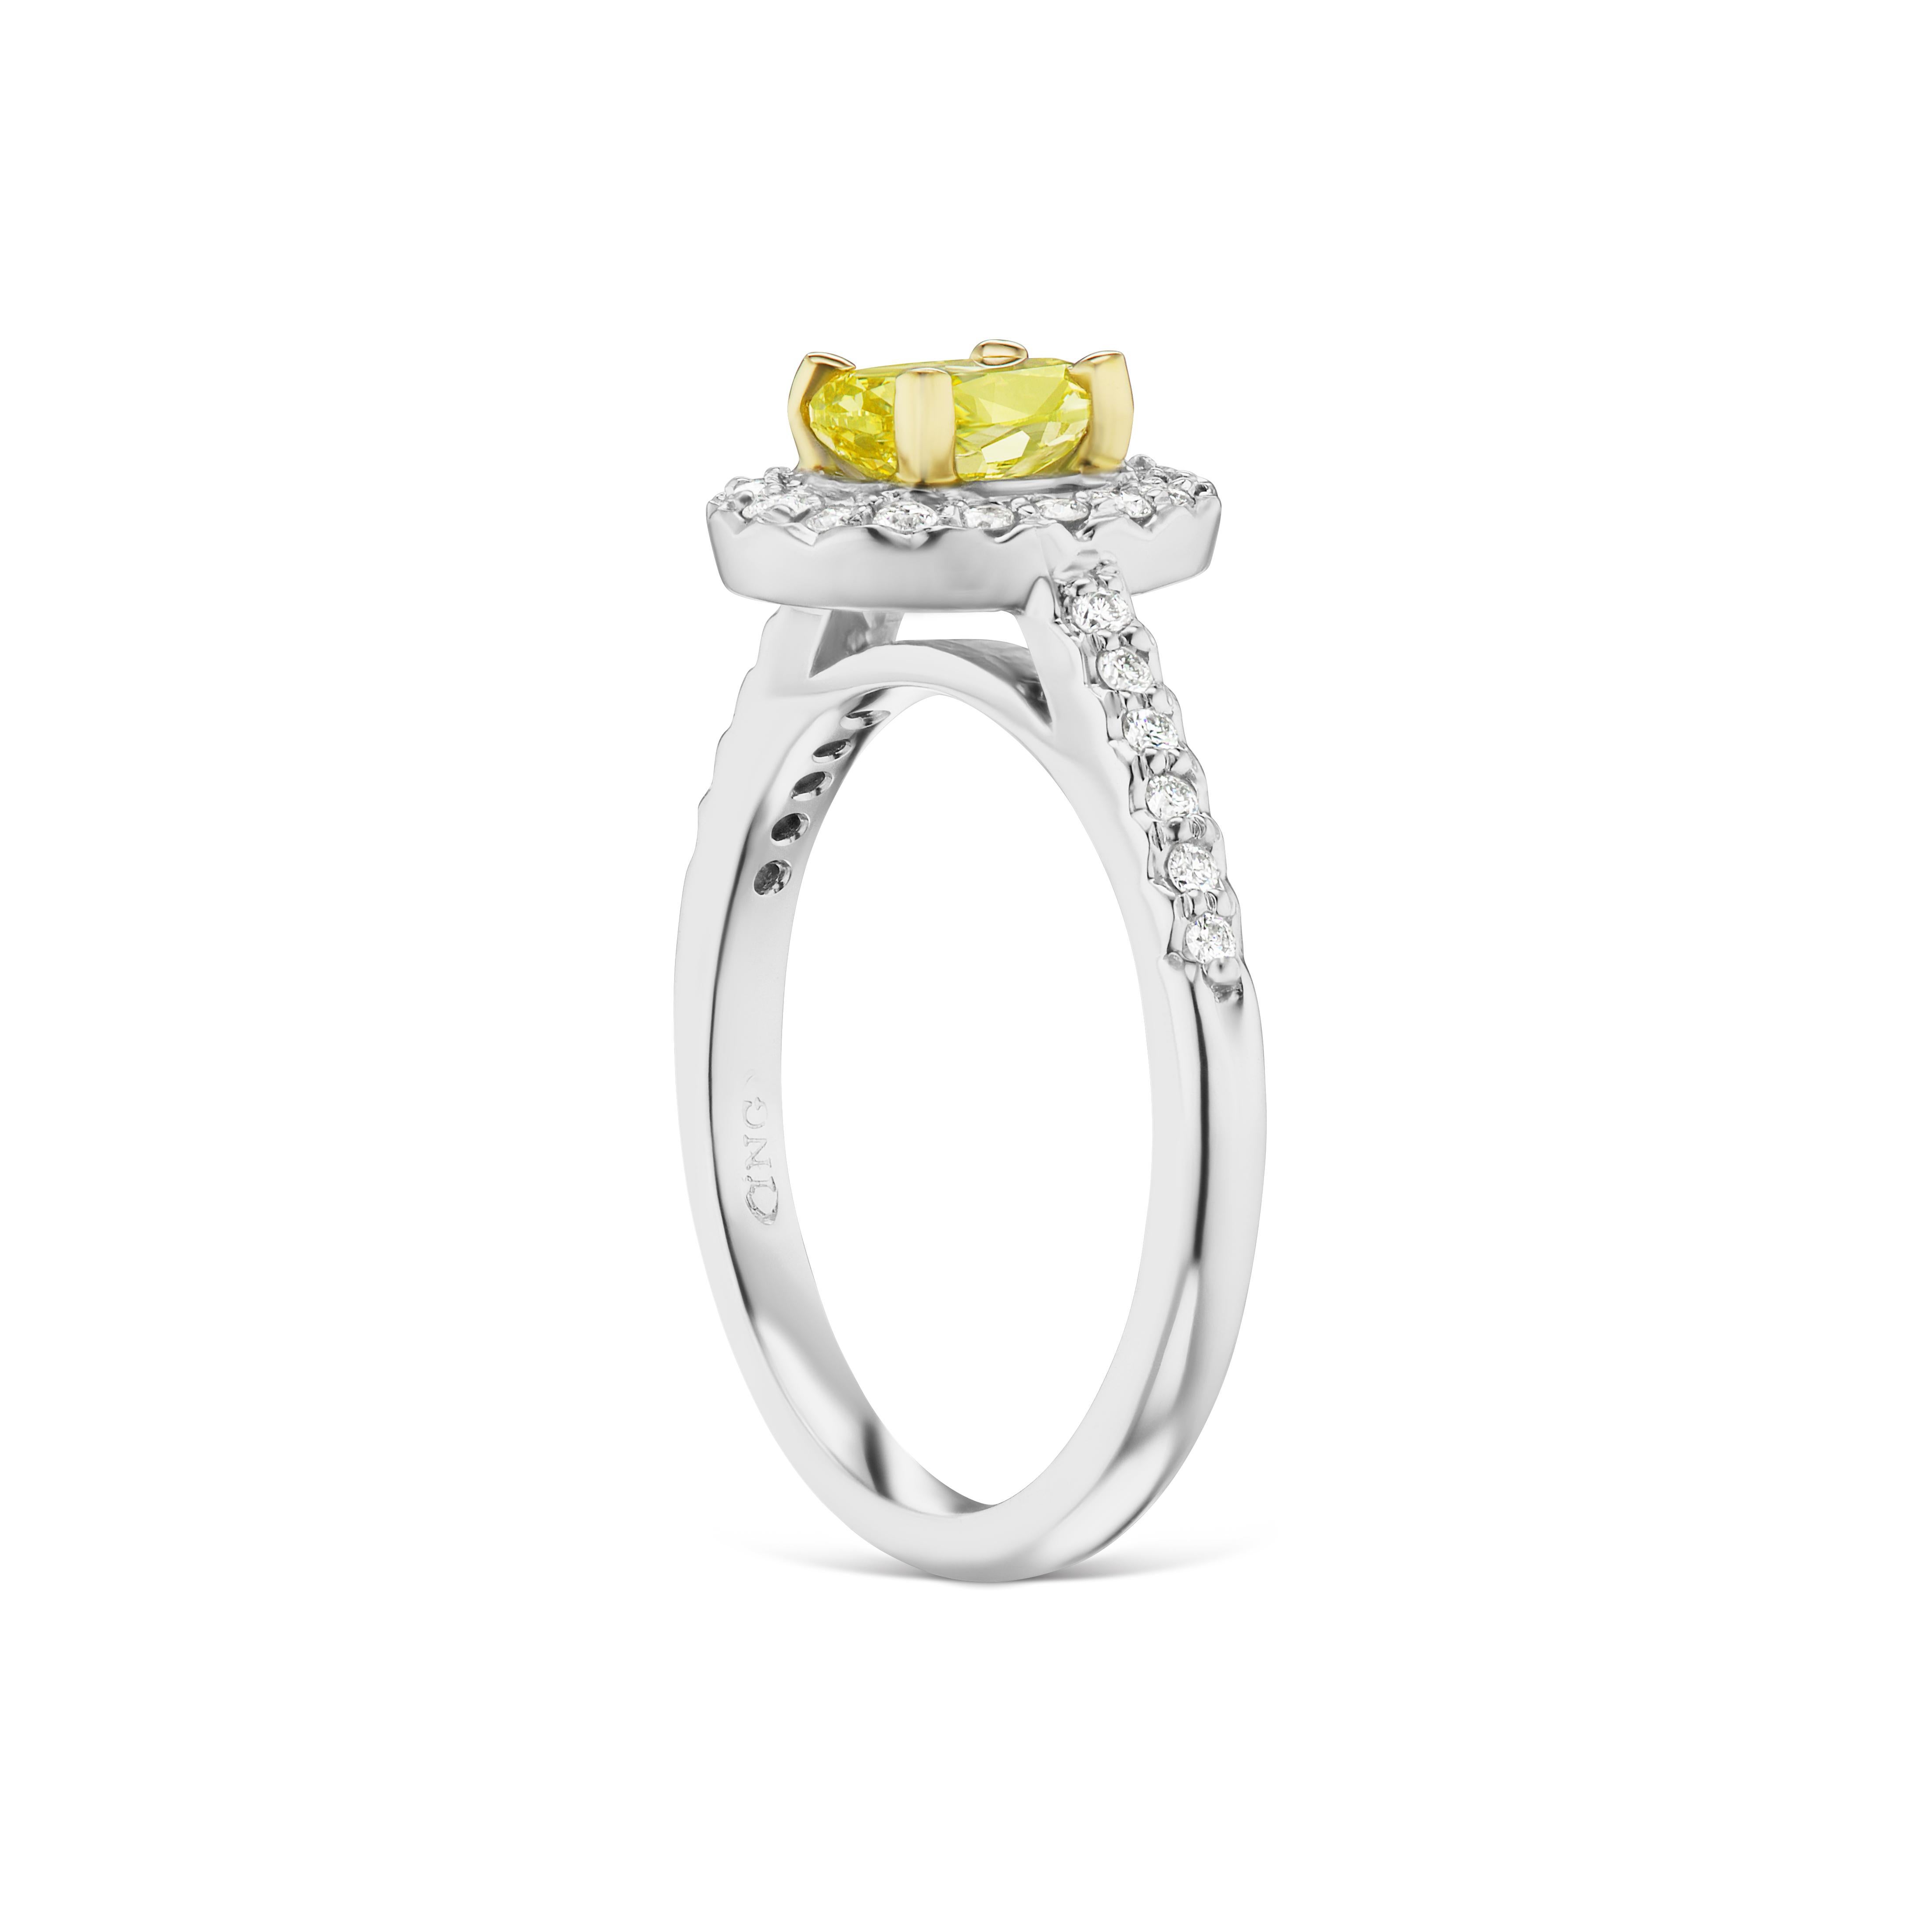 This Fancy Intense Greenish-Yellow .77ct. VS2 Oval Diamond is like a burst of sunshine! It's set in a 14kt. two-tone halo setting with another .27ct. total weight of FVS diamonds. If you don't see something, say something! We would be happy to work